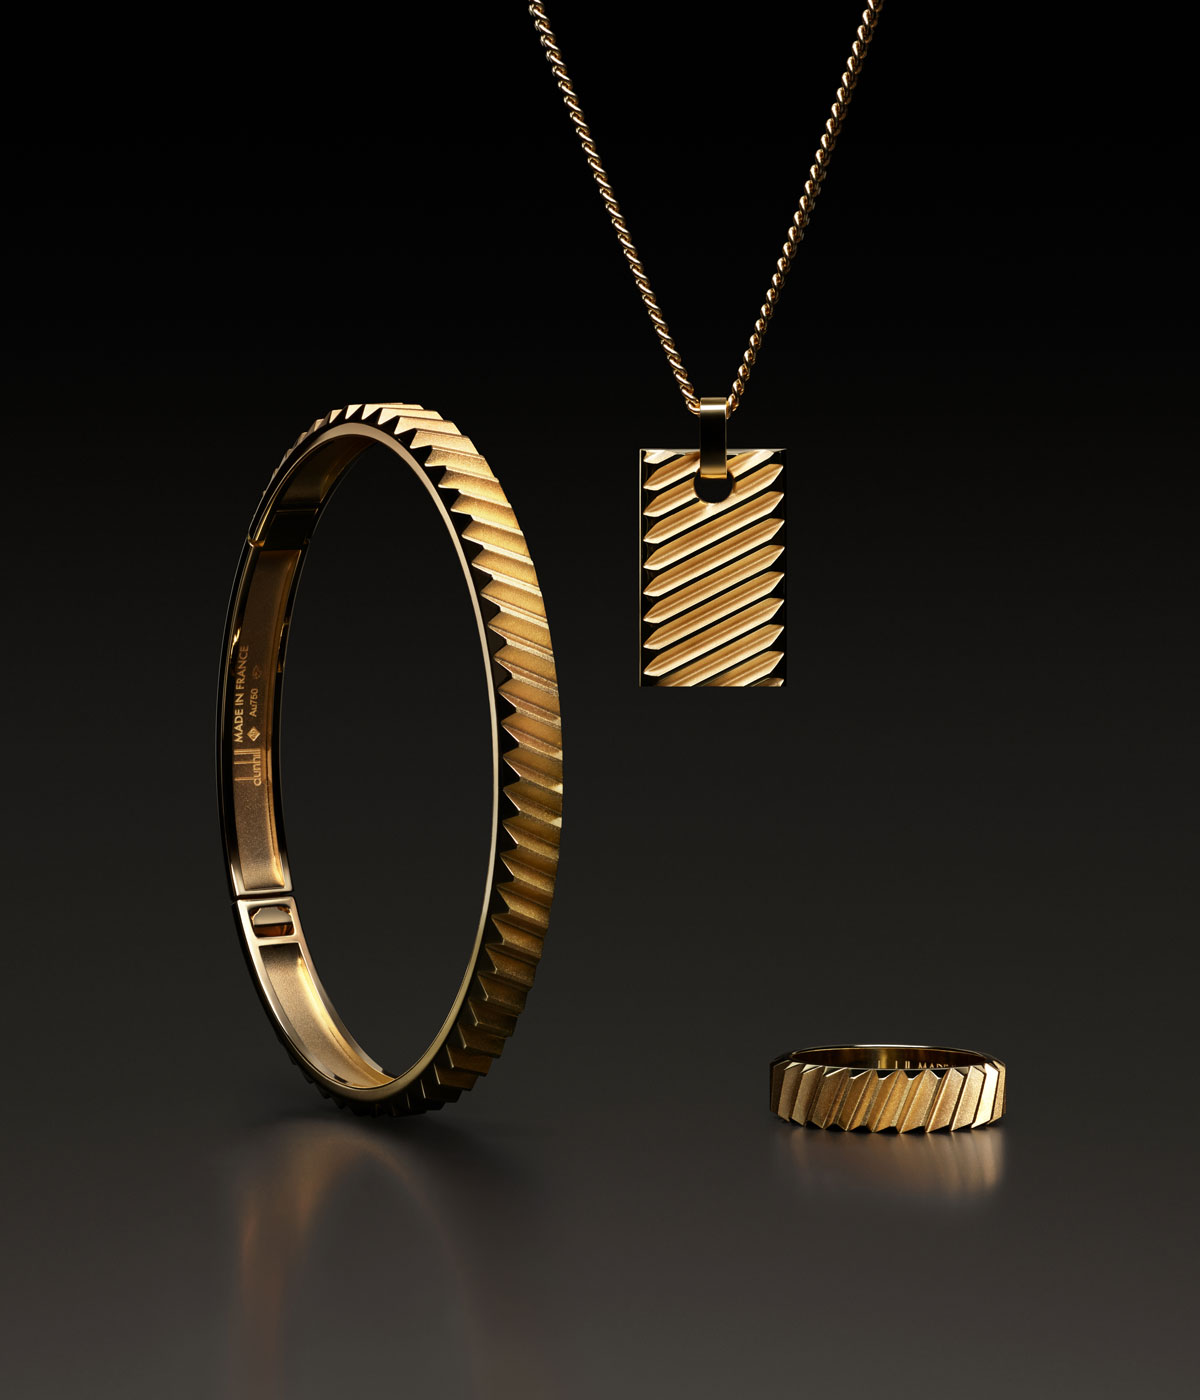 Dunhill unveils new men’s fine jewellery collection | Wallpaper